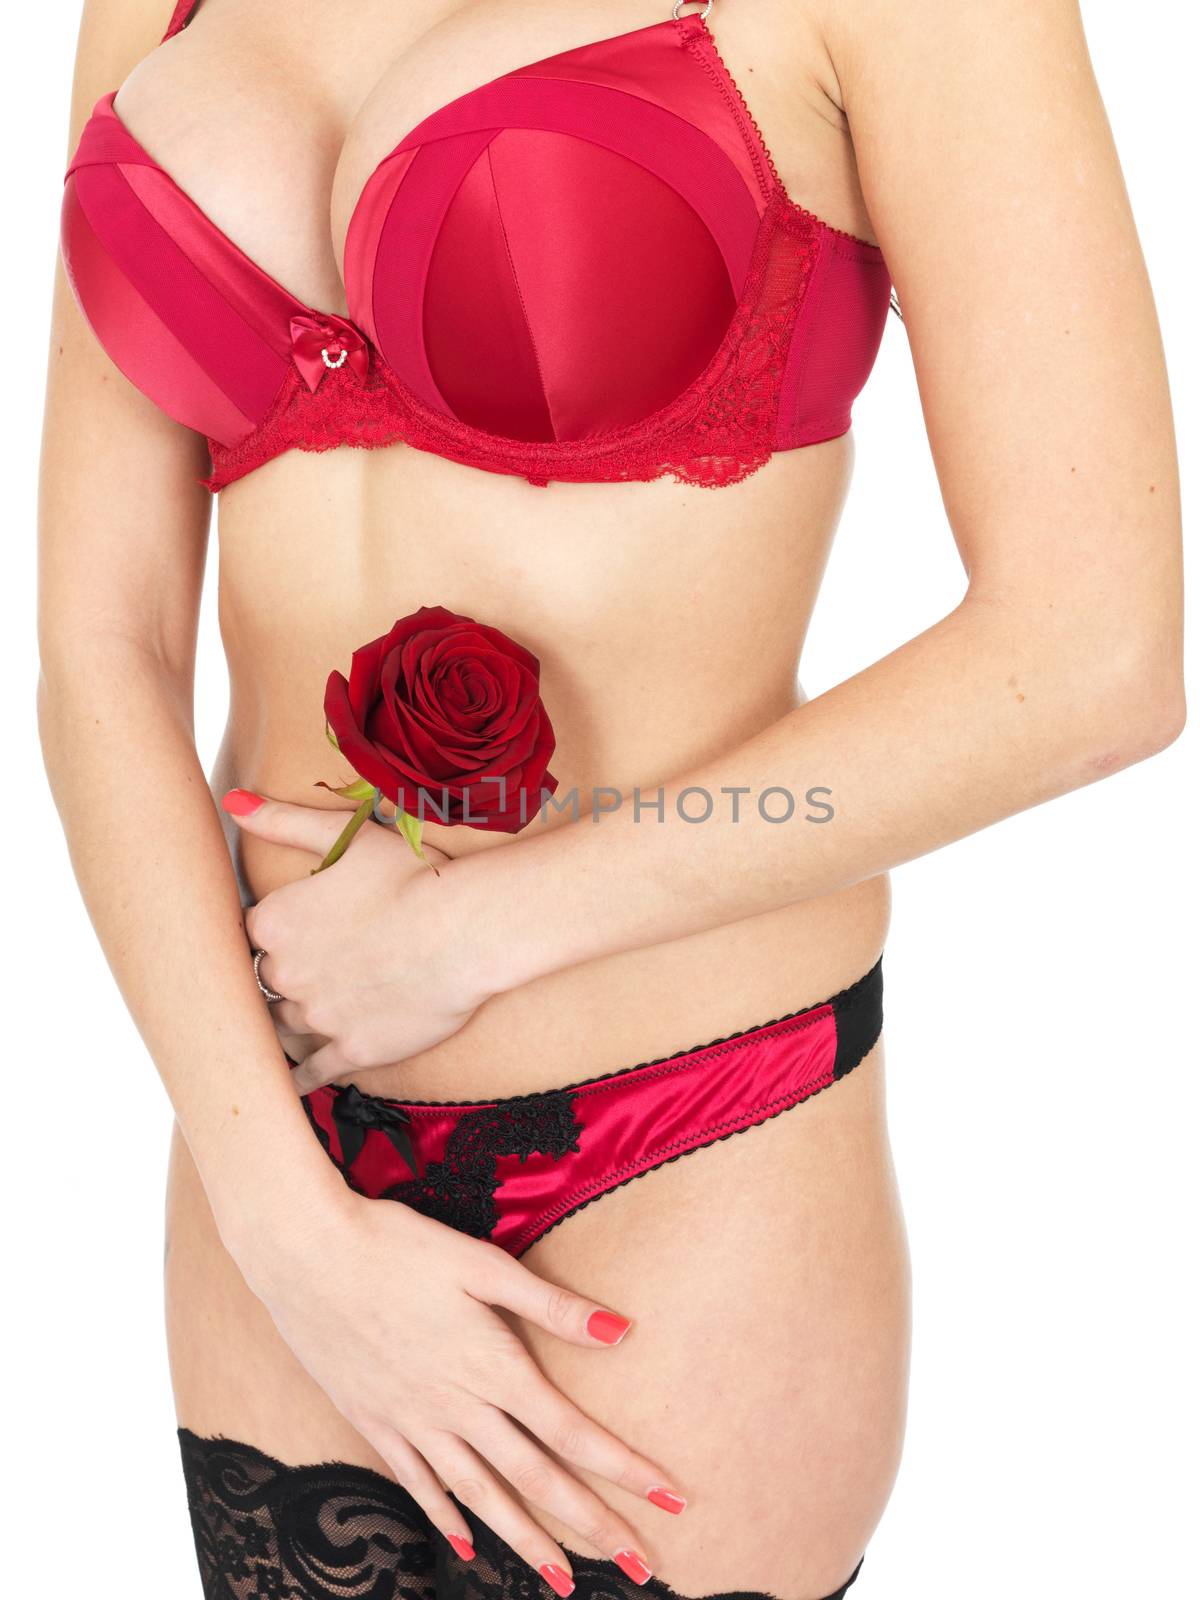 Sexy Young Woman Wearing Red Lingerie and Holding Red Roses by Whiteboxmedia